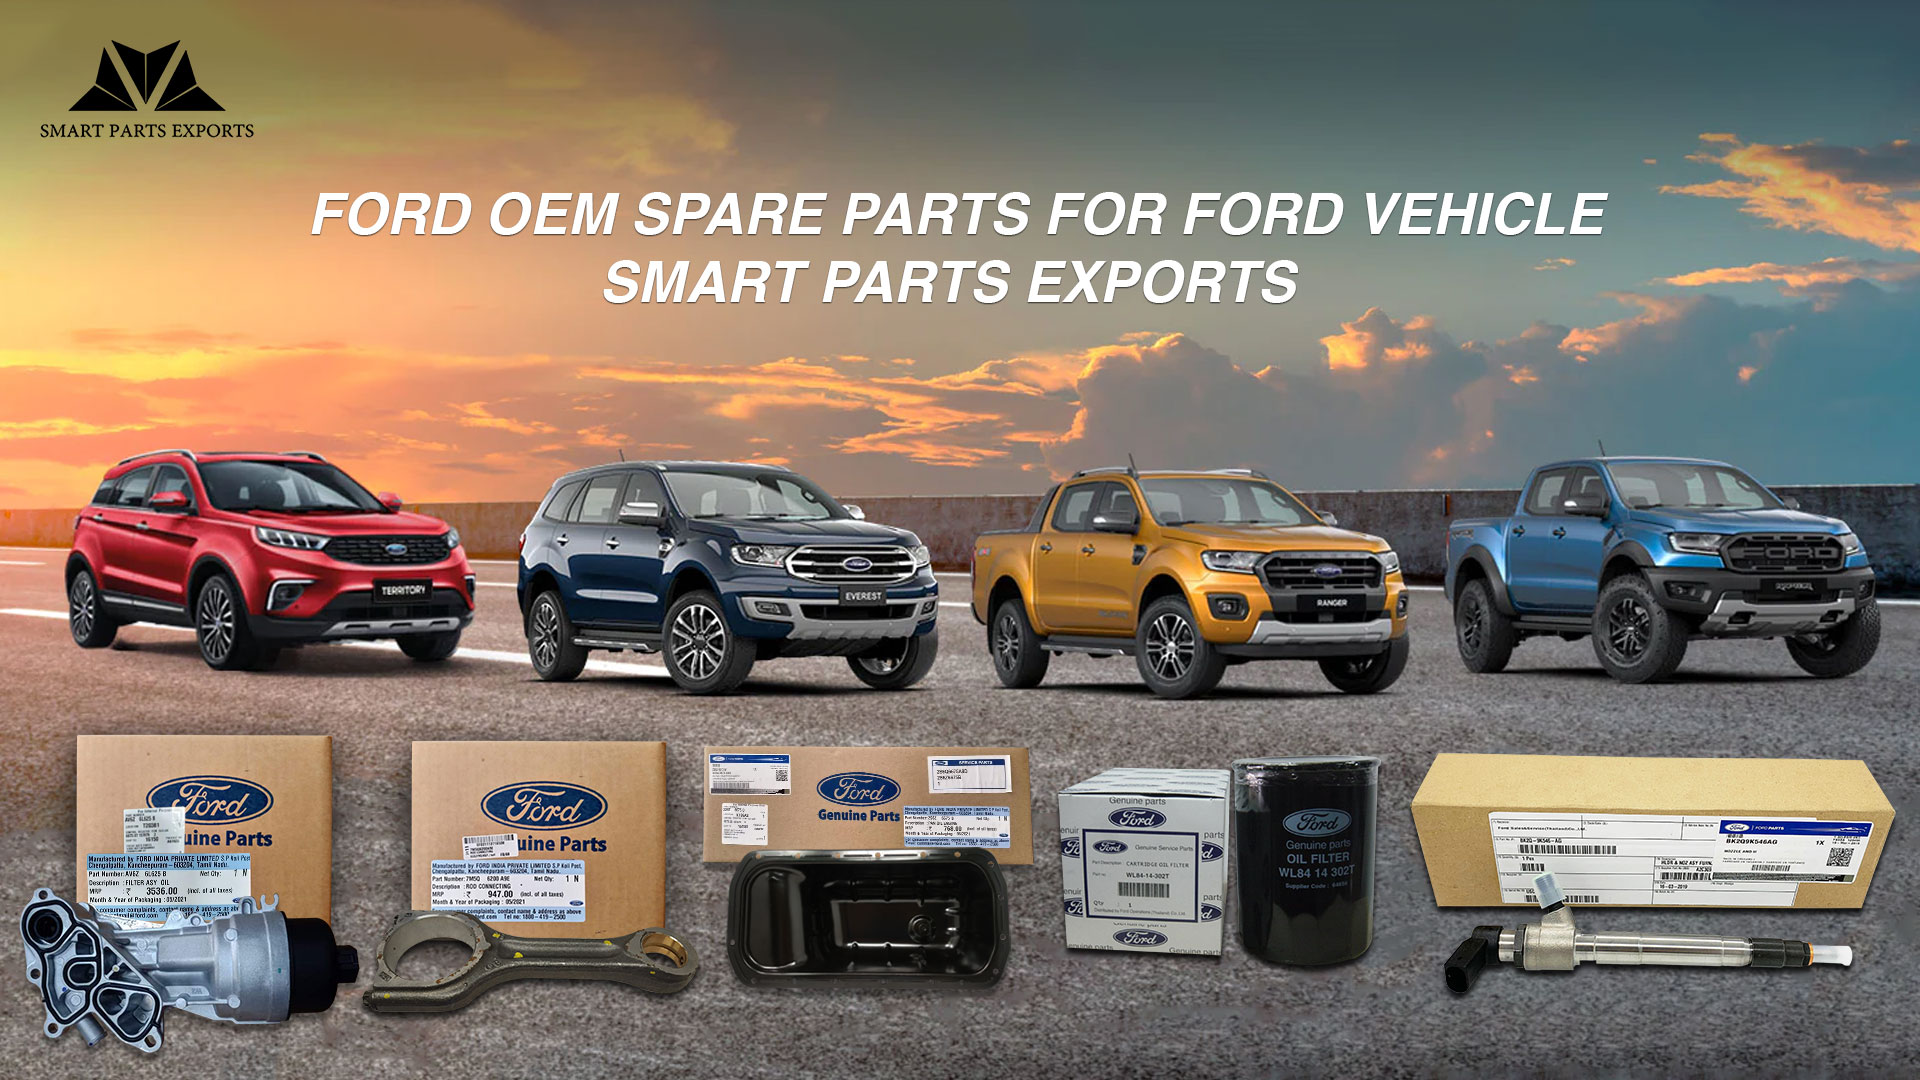 Ford OEM Spare Parts for Ford Vehicle – Smart Parts Exports 